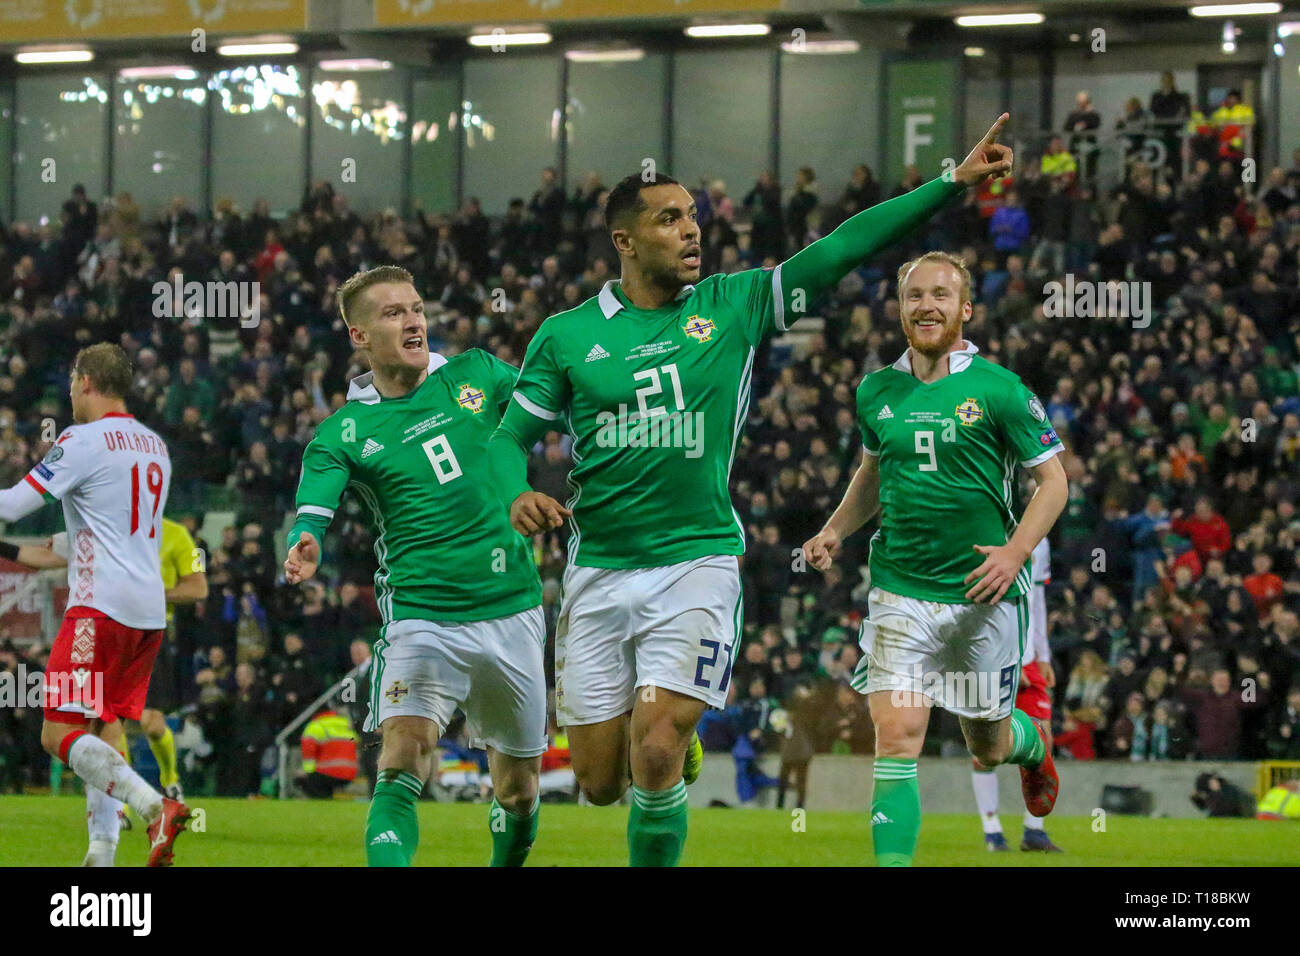 National Football Stadium at Windsor Park, Belfast, Northern Ireland. 24  March 2019. UEFA EURO 2020 Qualifier- Northern Ireland v Belarus. Action from tonight's game. Josh Magennis  (21) celebrates his winner for Northern Ireland with Steven Davis (8) and Liam Boyce (9).  Credit: David Hunter/Alamy Live News. Stock Photo